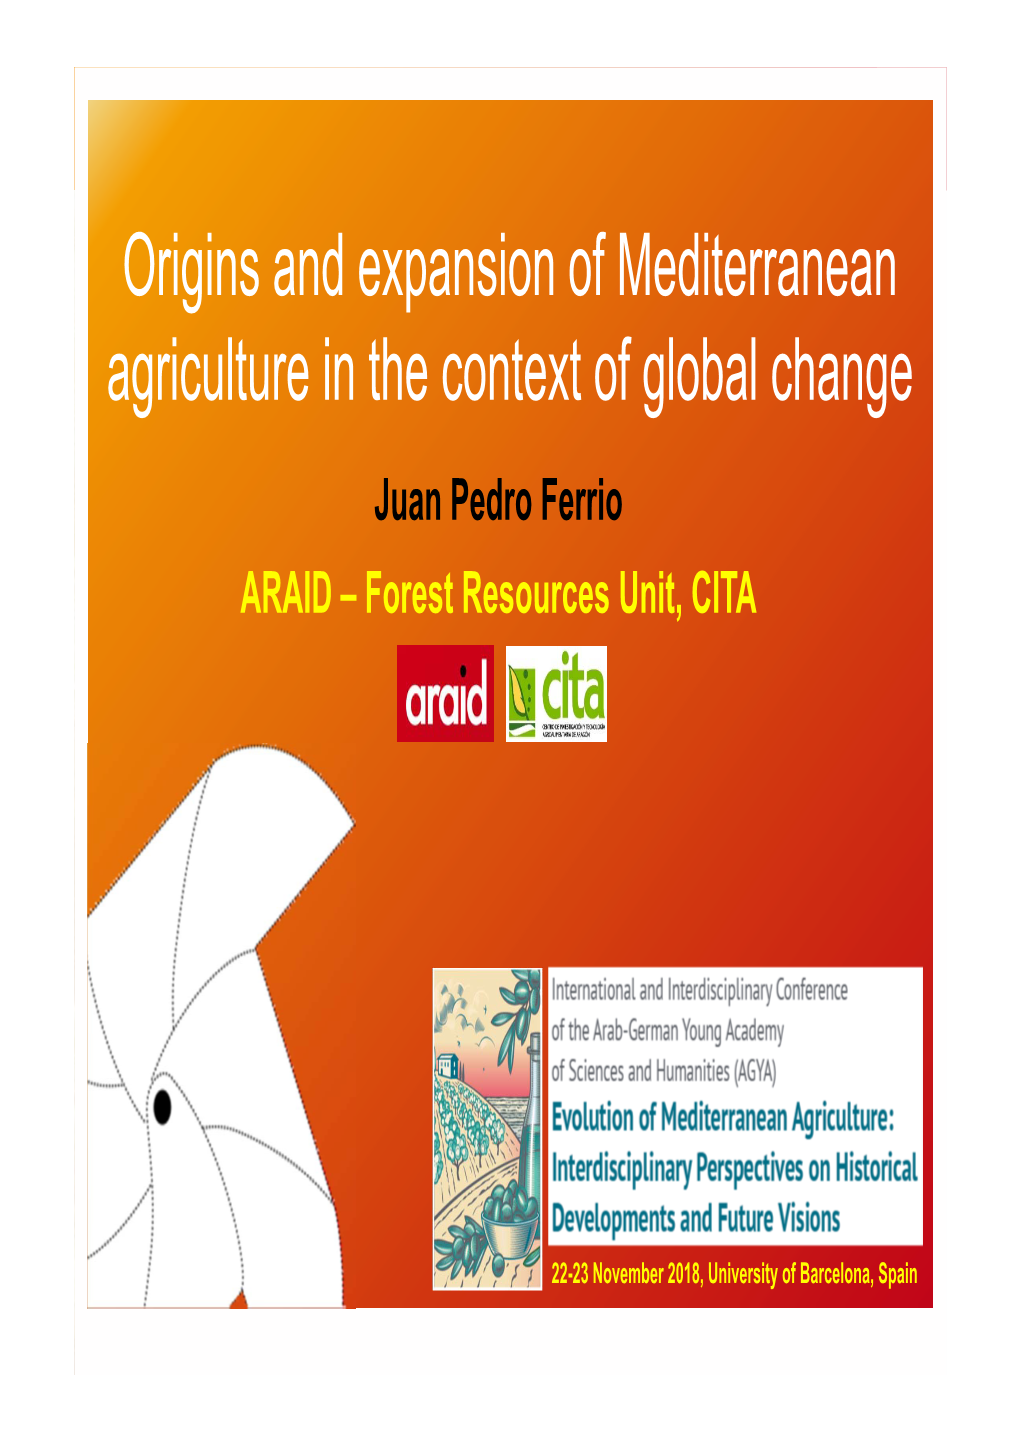 Origins and Expansion of Mediterranean Agriculture in the Context of Global Change Juan Pedro Ferrio ARAID – Forest Resources Unit, CITA